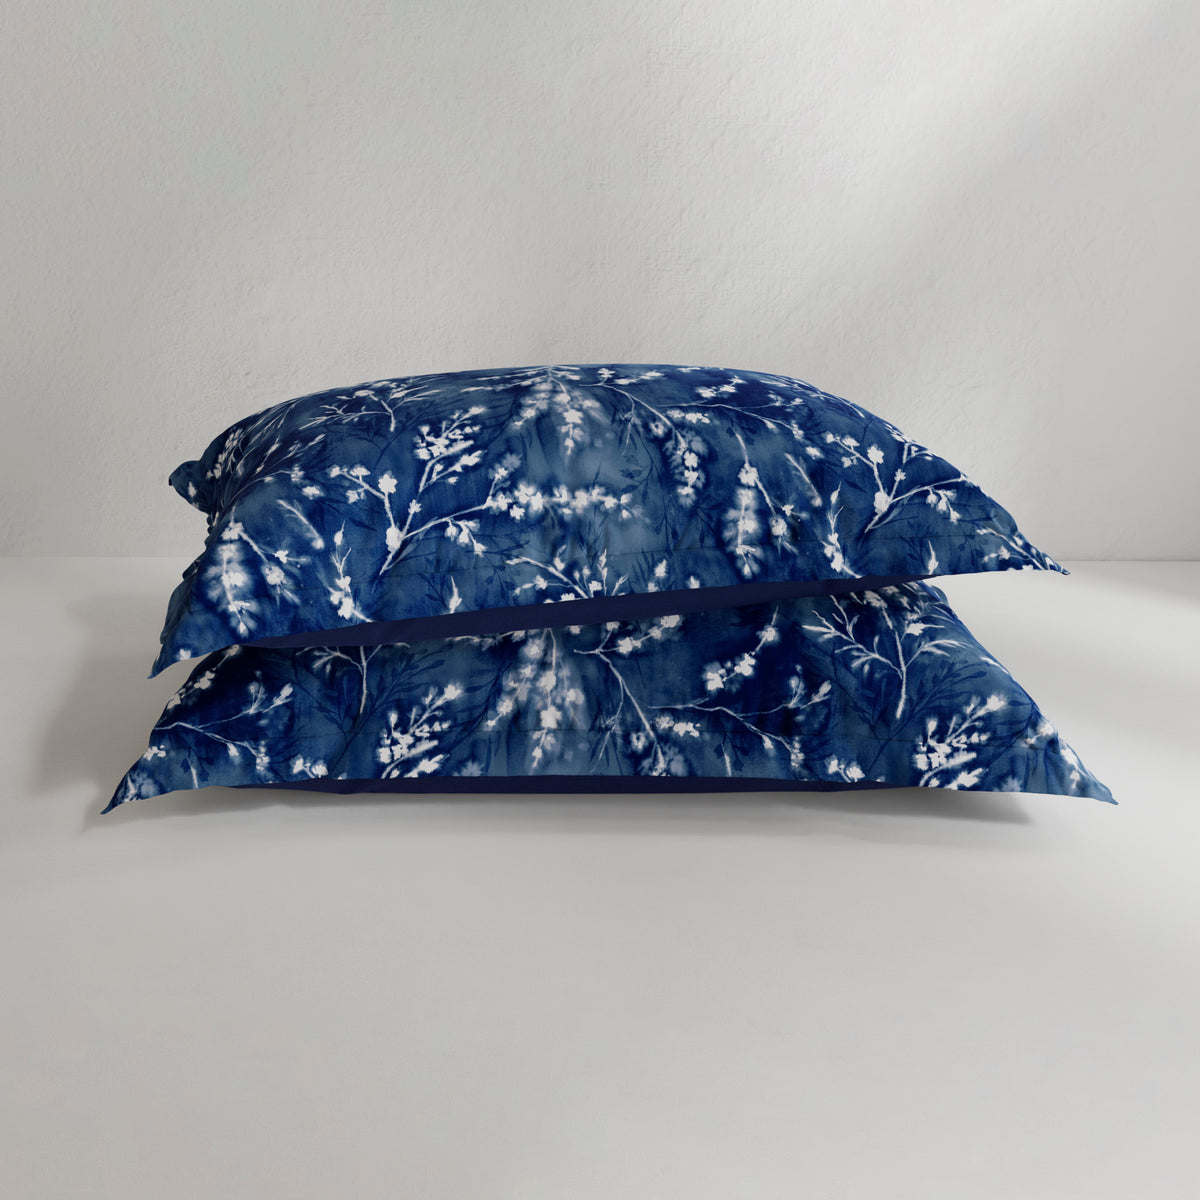 Image of two Floral Midnight Pillow Shams on pillows stacked on top of each other with a white background